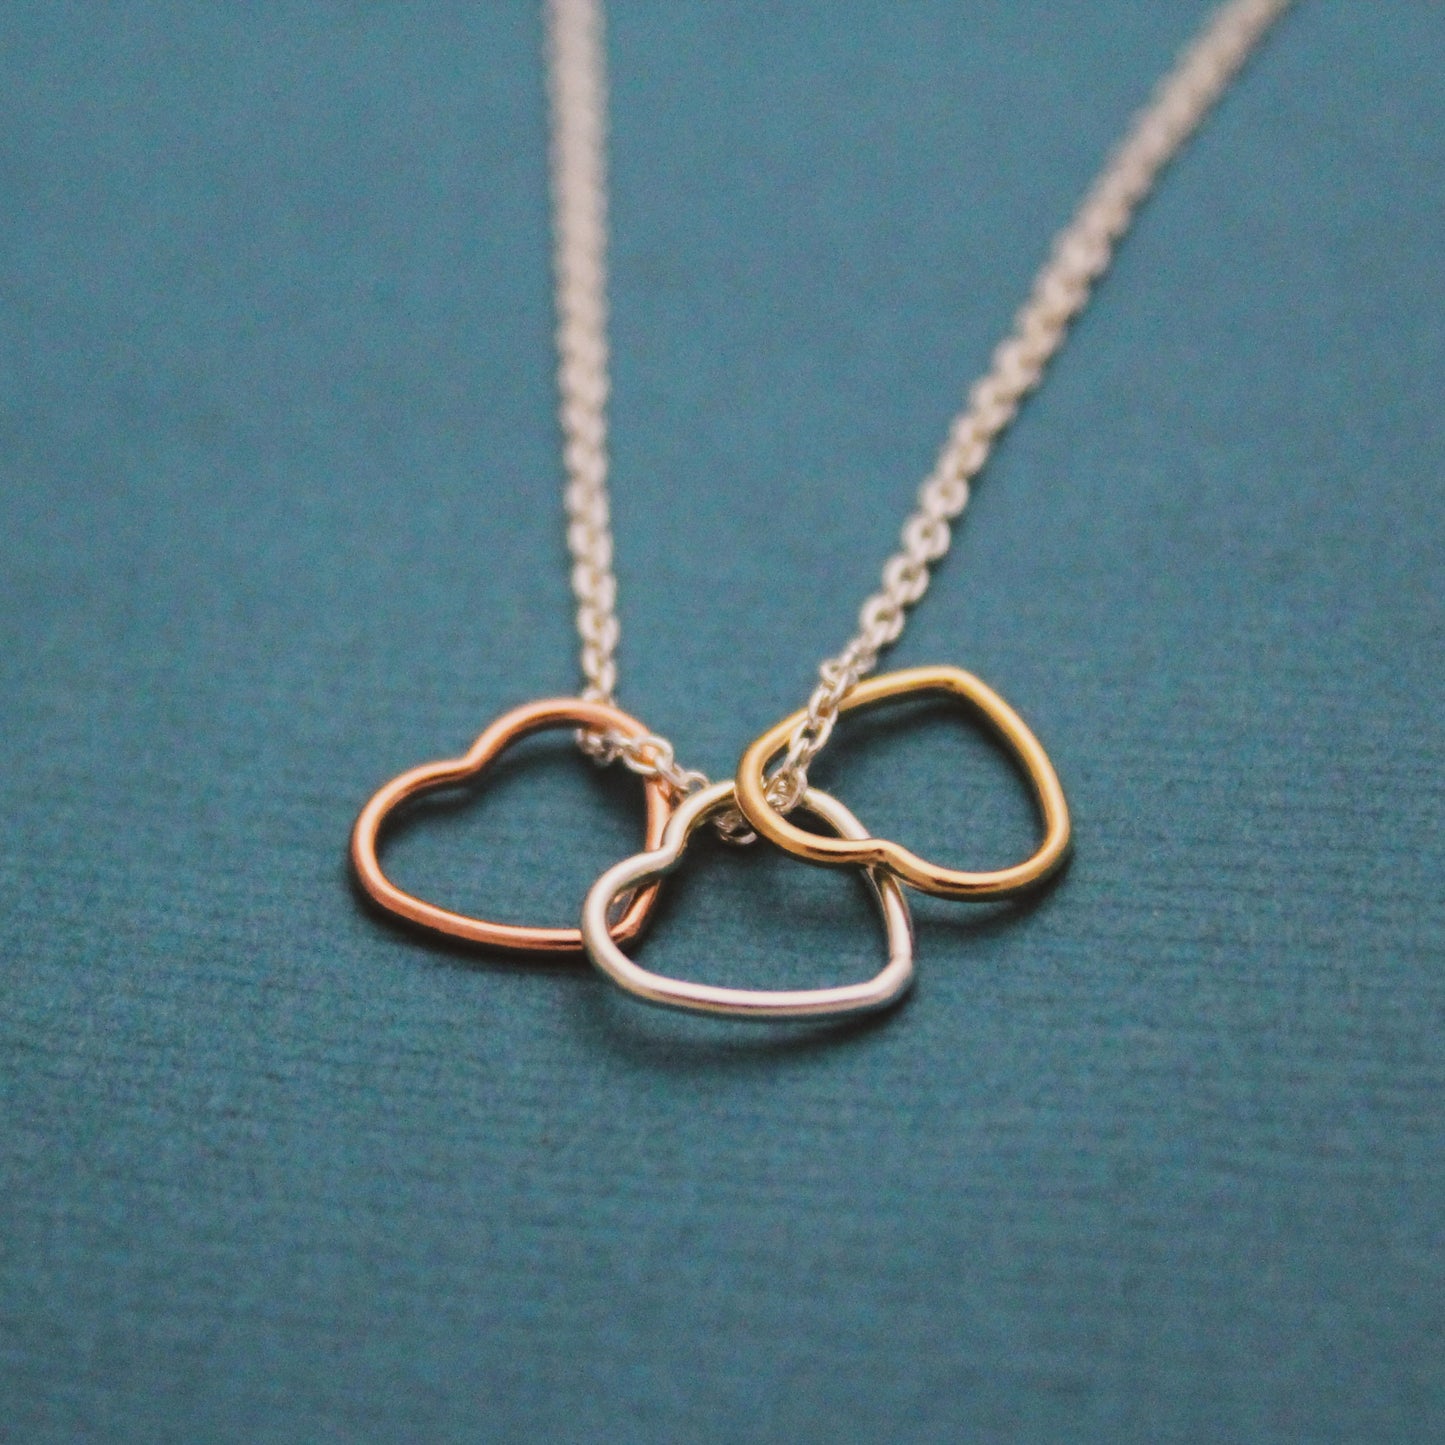 Tiny Hearts Necklace in Sterling Silver, 14K Gold Filled , & Rose Gold Filled, Past Present Future Necklace, Three Heart Necklace Jewelry